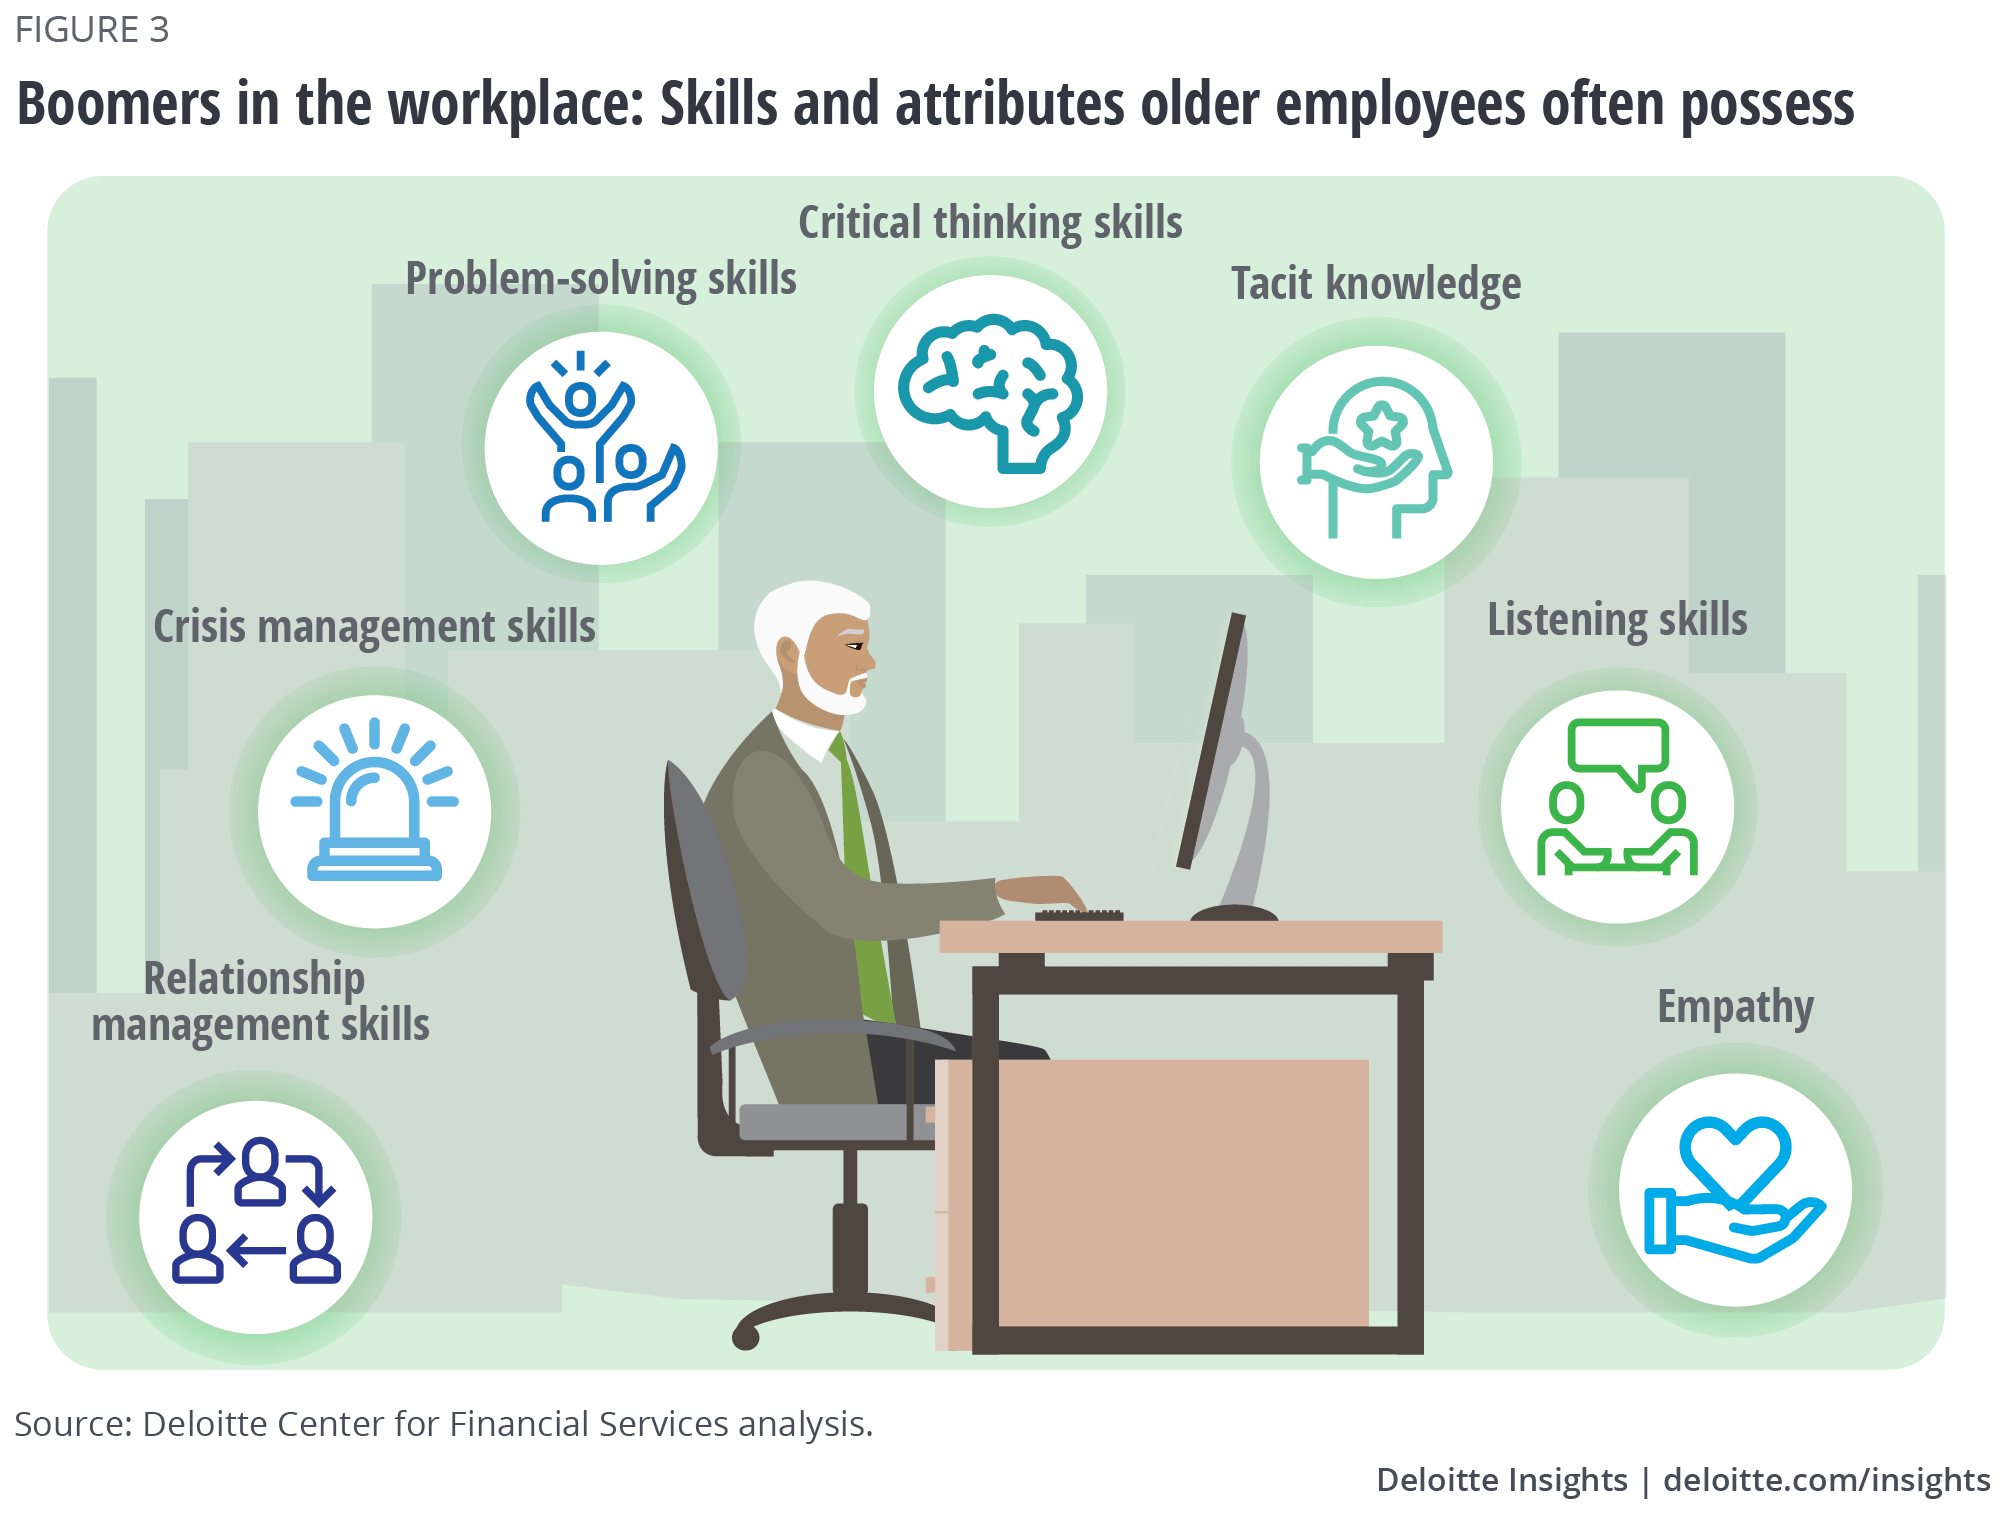 Boomers in the workplace: Skills and attributes older employees often possess